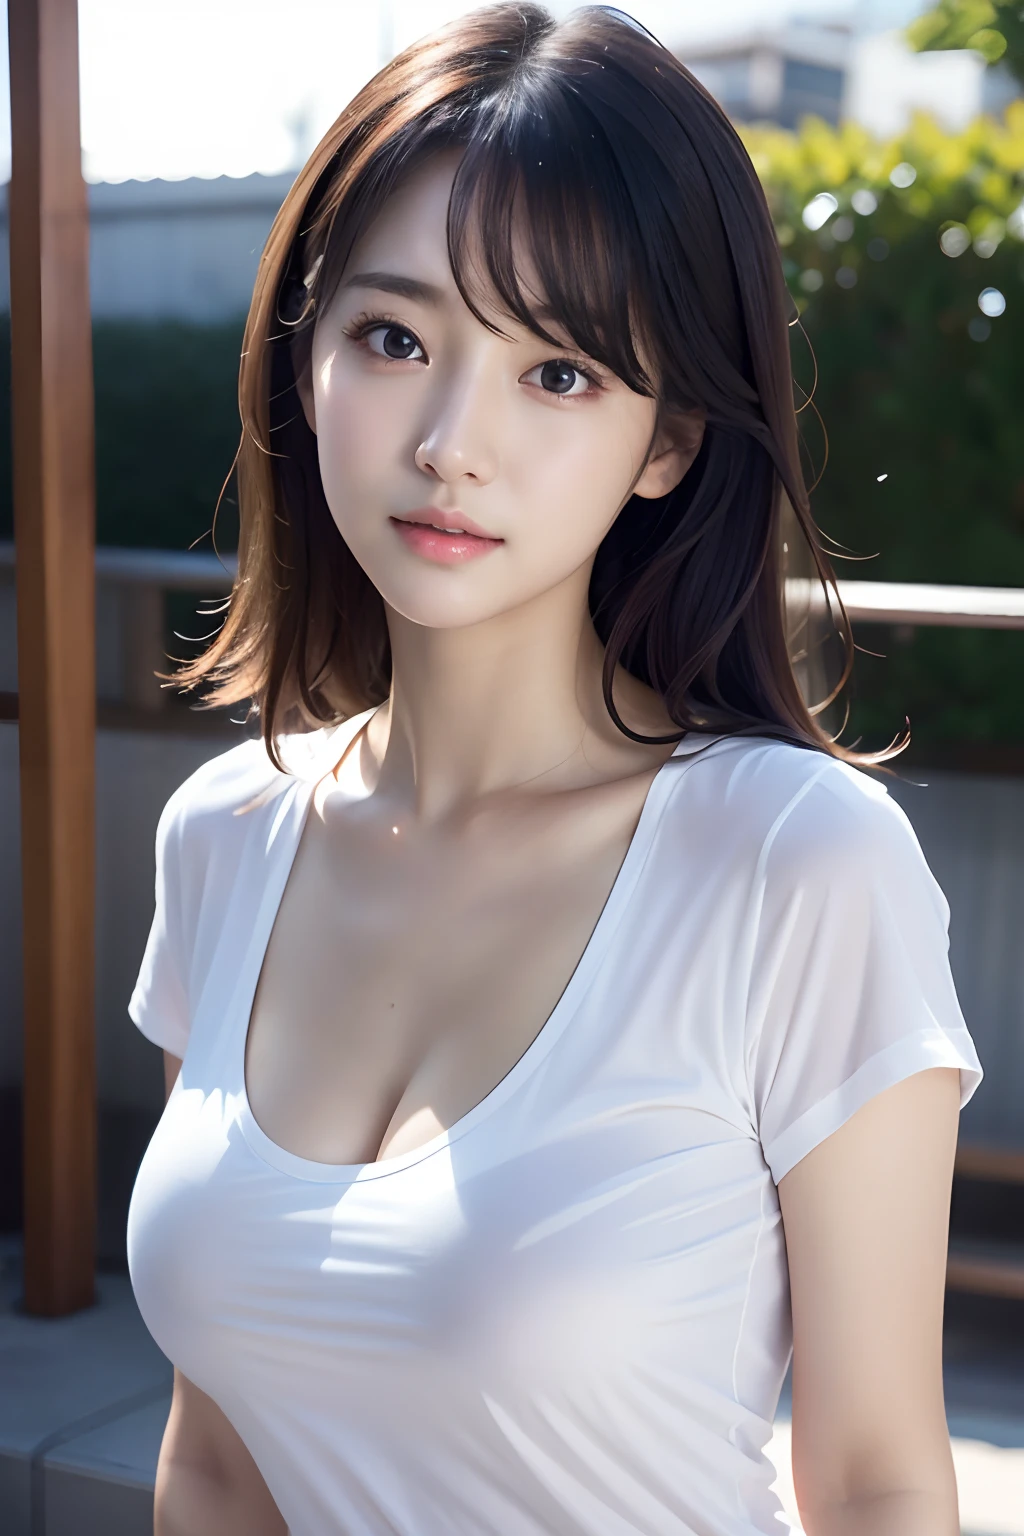 clothed、(photo real:1.4)、(Hyperrealistic:1.4)、(Realstic:1.3)、
(Smoother lighting:1.05)、(Improved lighting quality in movies:0.9)、32K、
1女の子、20歳の女の子、Realistic lighting、Backlit、Facial light、ray trace、(Brightening light:1.2)、(Increase quality:1.4)、
(best quality real texture skin)、Fine eyes、finerly detailed face、
(Tired, sleepy and satisfied:0.0)、close-up face、T‐shirt、
(Bodyline mood improvement:1.1)、Glossy skin、actress、korean idol、Nogizaka Idol、hposing Gravure Idol